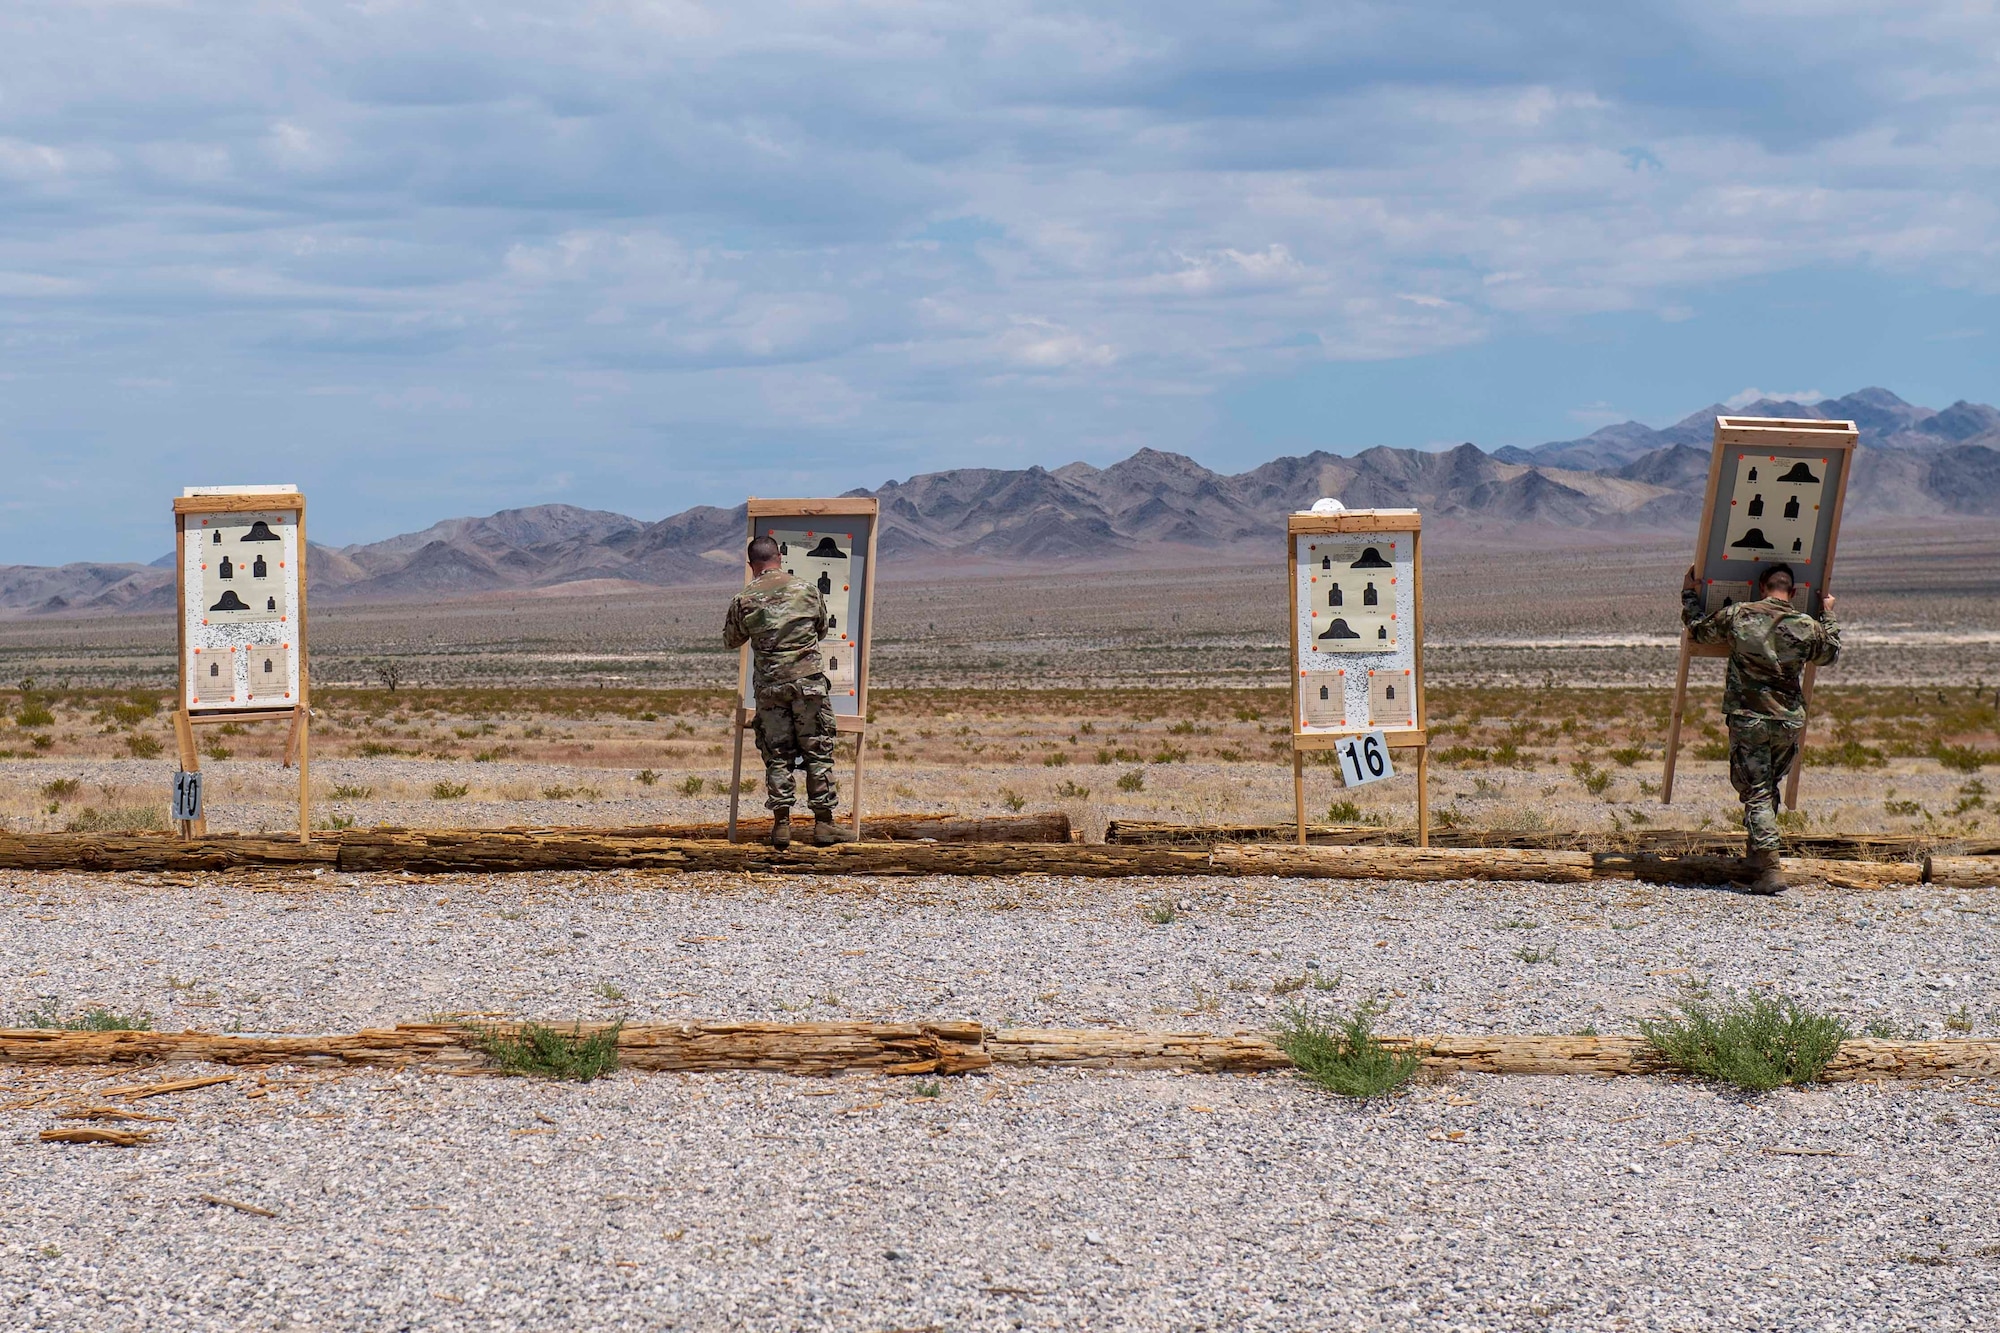 Two male Airmen set up targets on the range